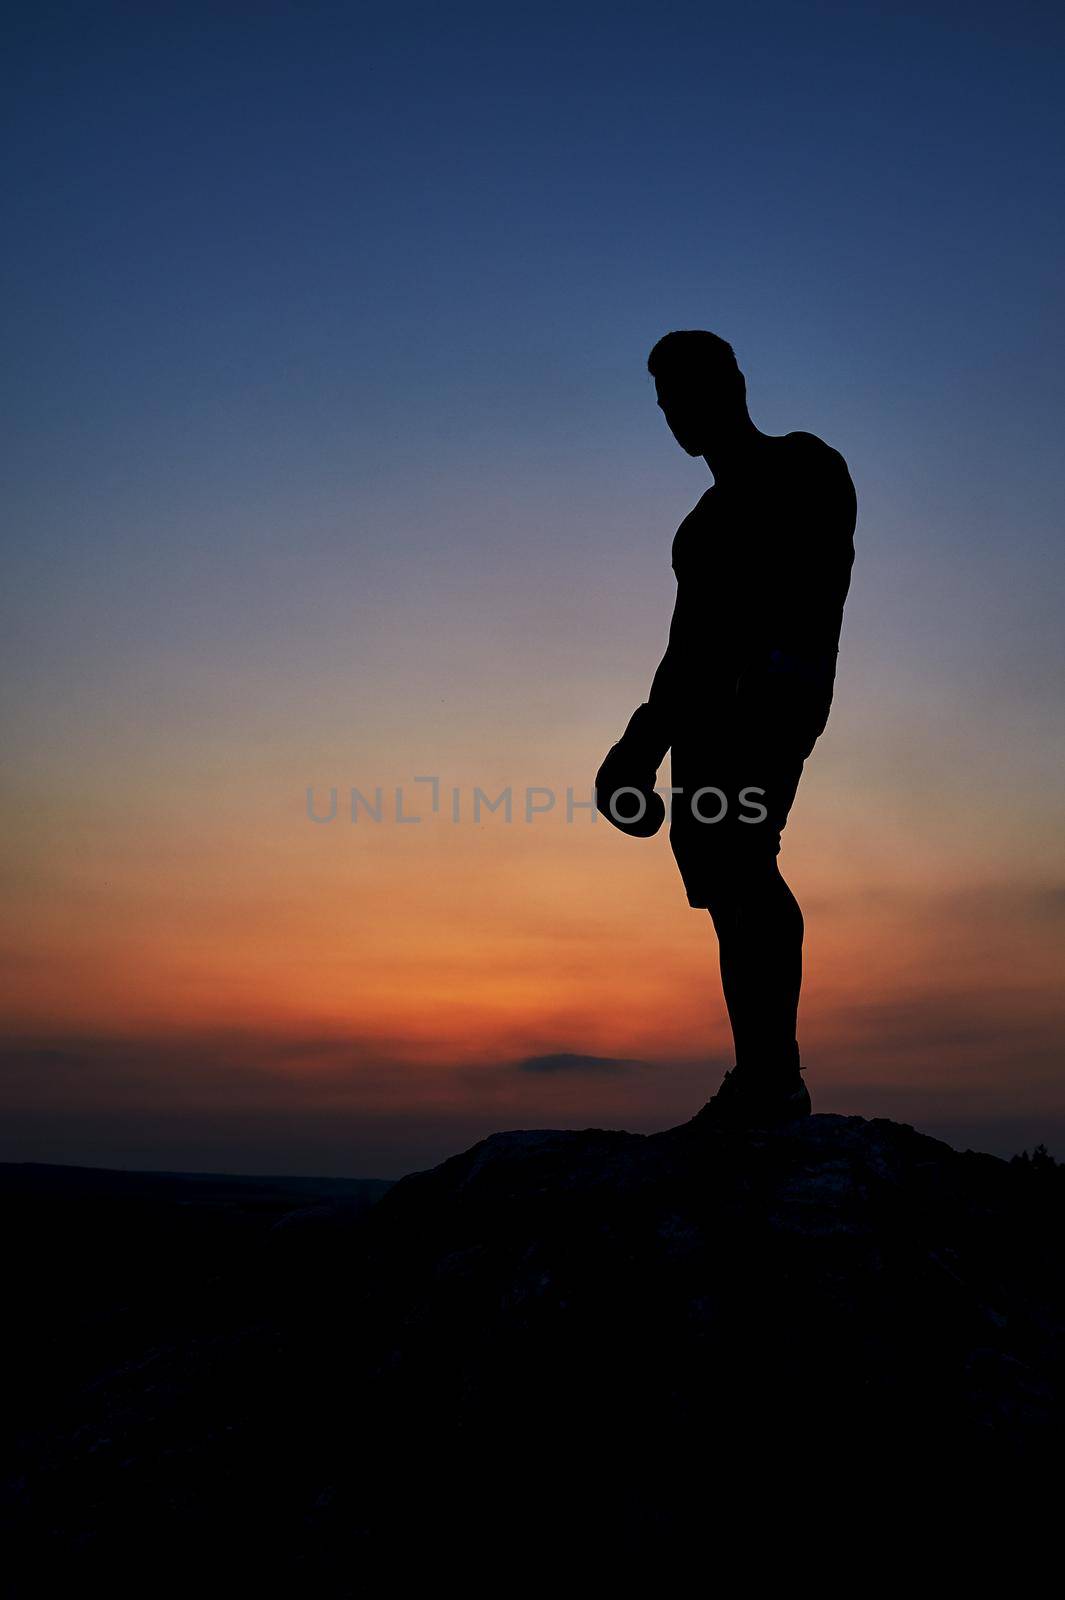 Silhouette of a man standing on top of a rock observing beautiful sunset copyspace anonymous mysterious nature skies sky dusk epic alone person loneliness beauty relaxation vitality harmony.